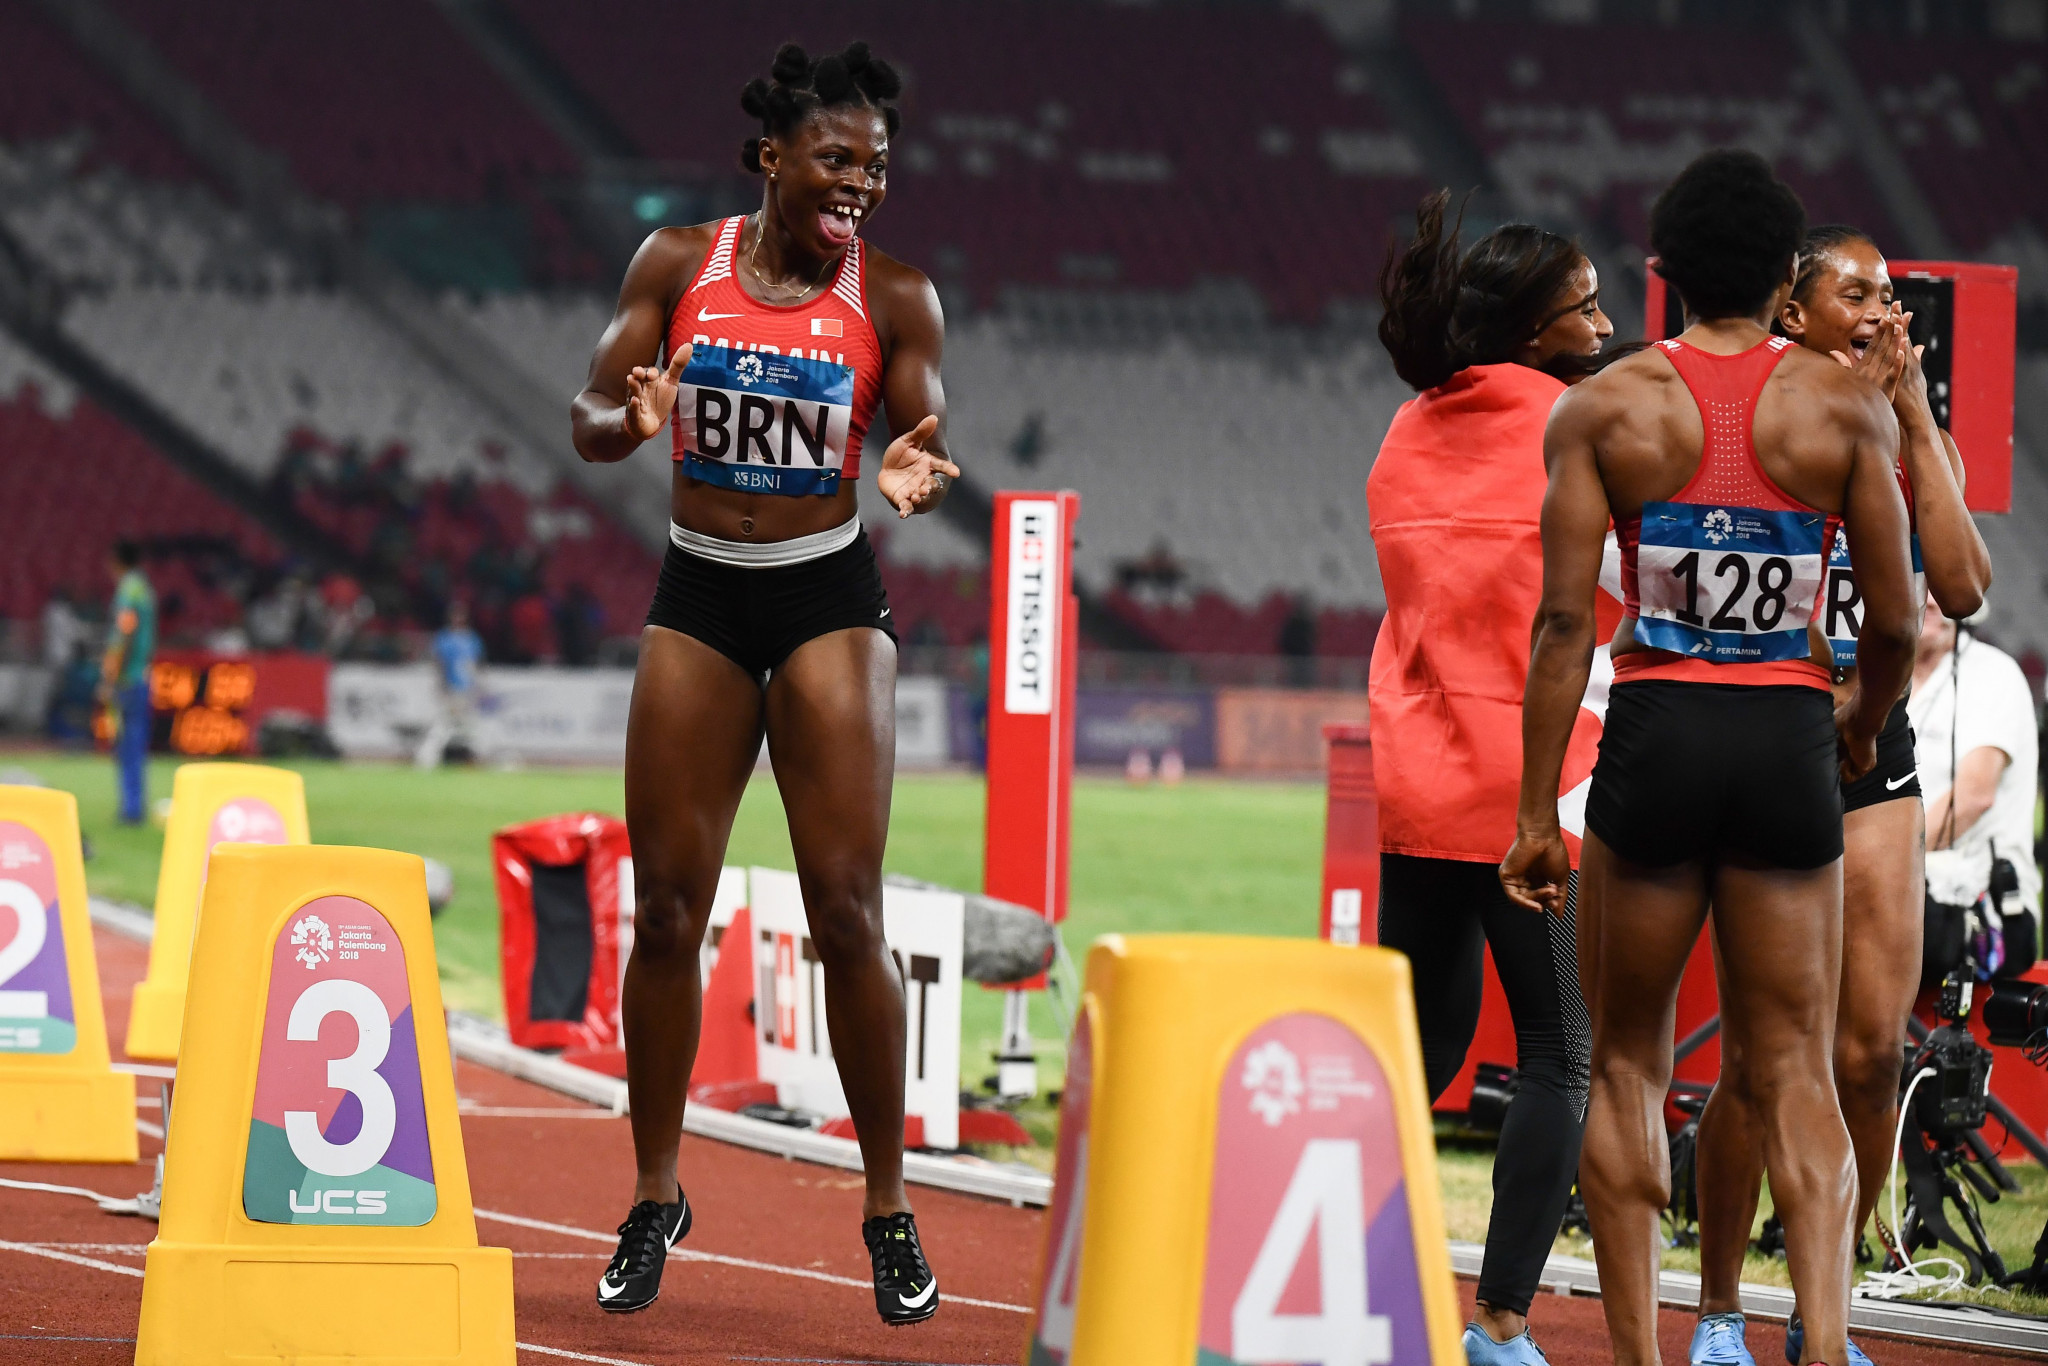 Edidiong Odiong completed a sprint triple at Jakarta Palembang 2018 after helping Bahrain to an Asian Games-record breaking win in the women's 4x100 metres relay on day 12 of competition ©Getty Images